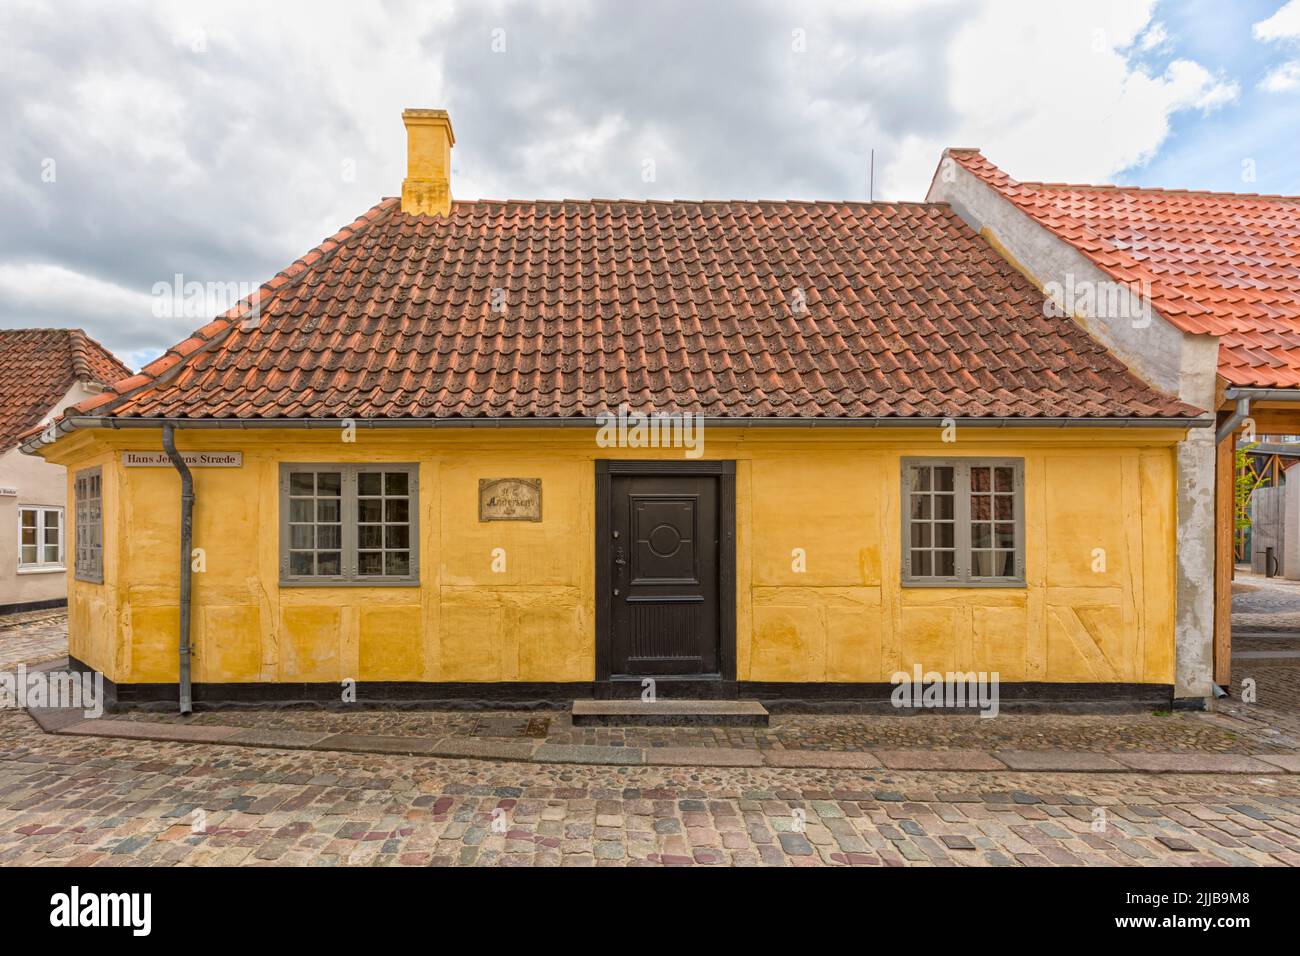 Hans Christian Andersens birthplace at the old town of Odense, Denmark Stock Photo